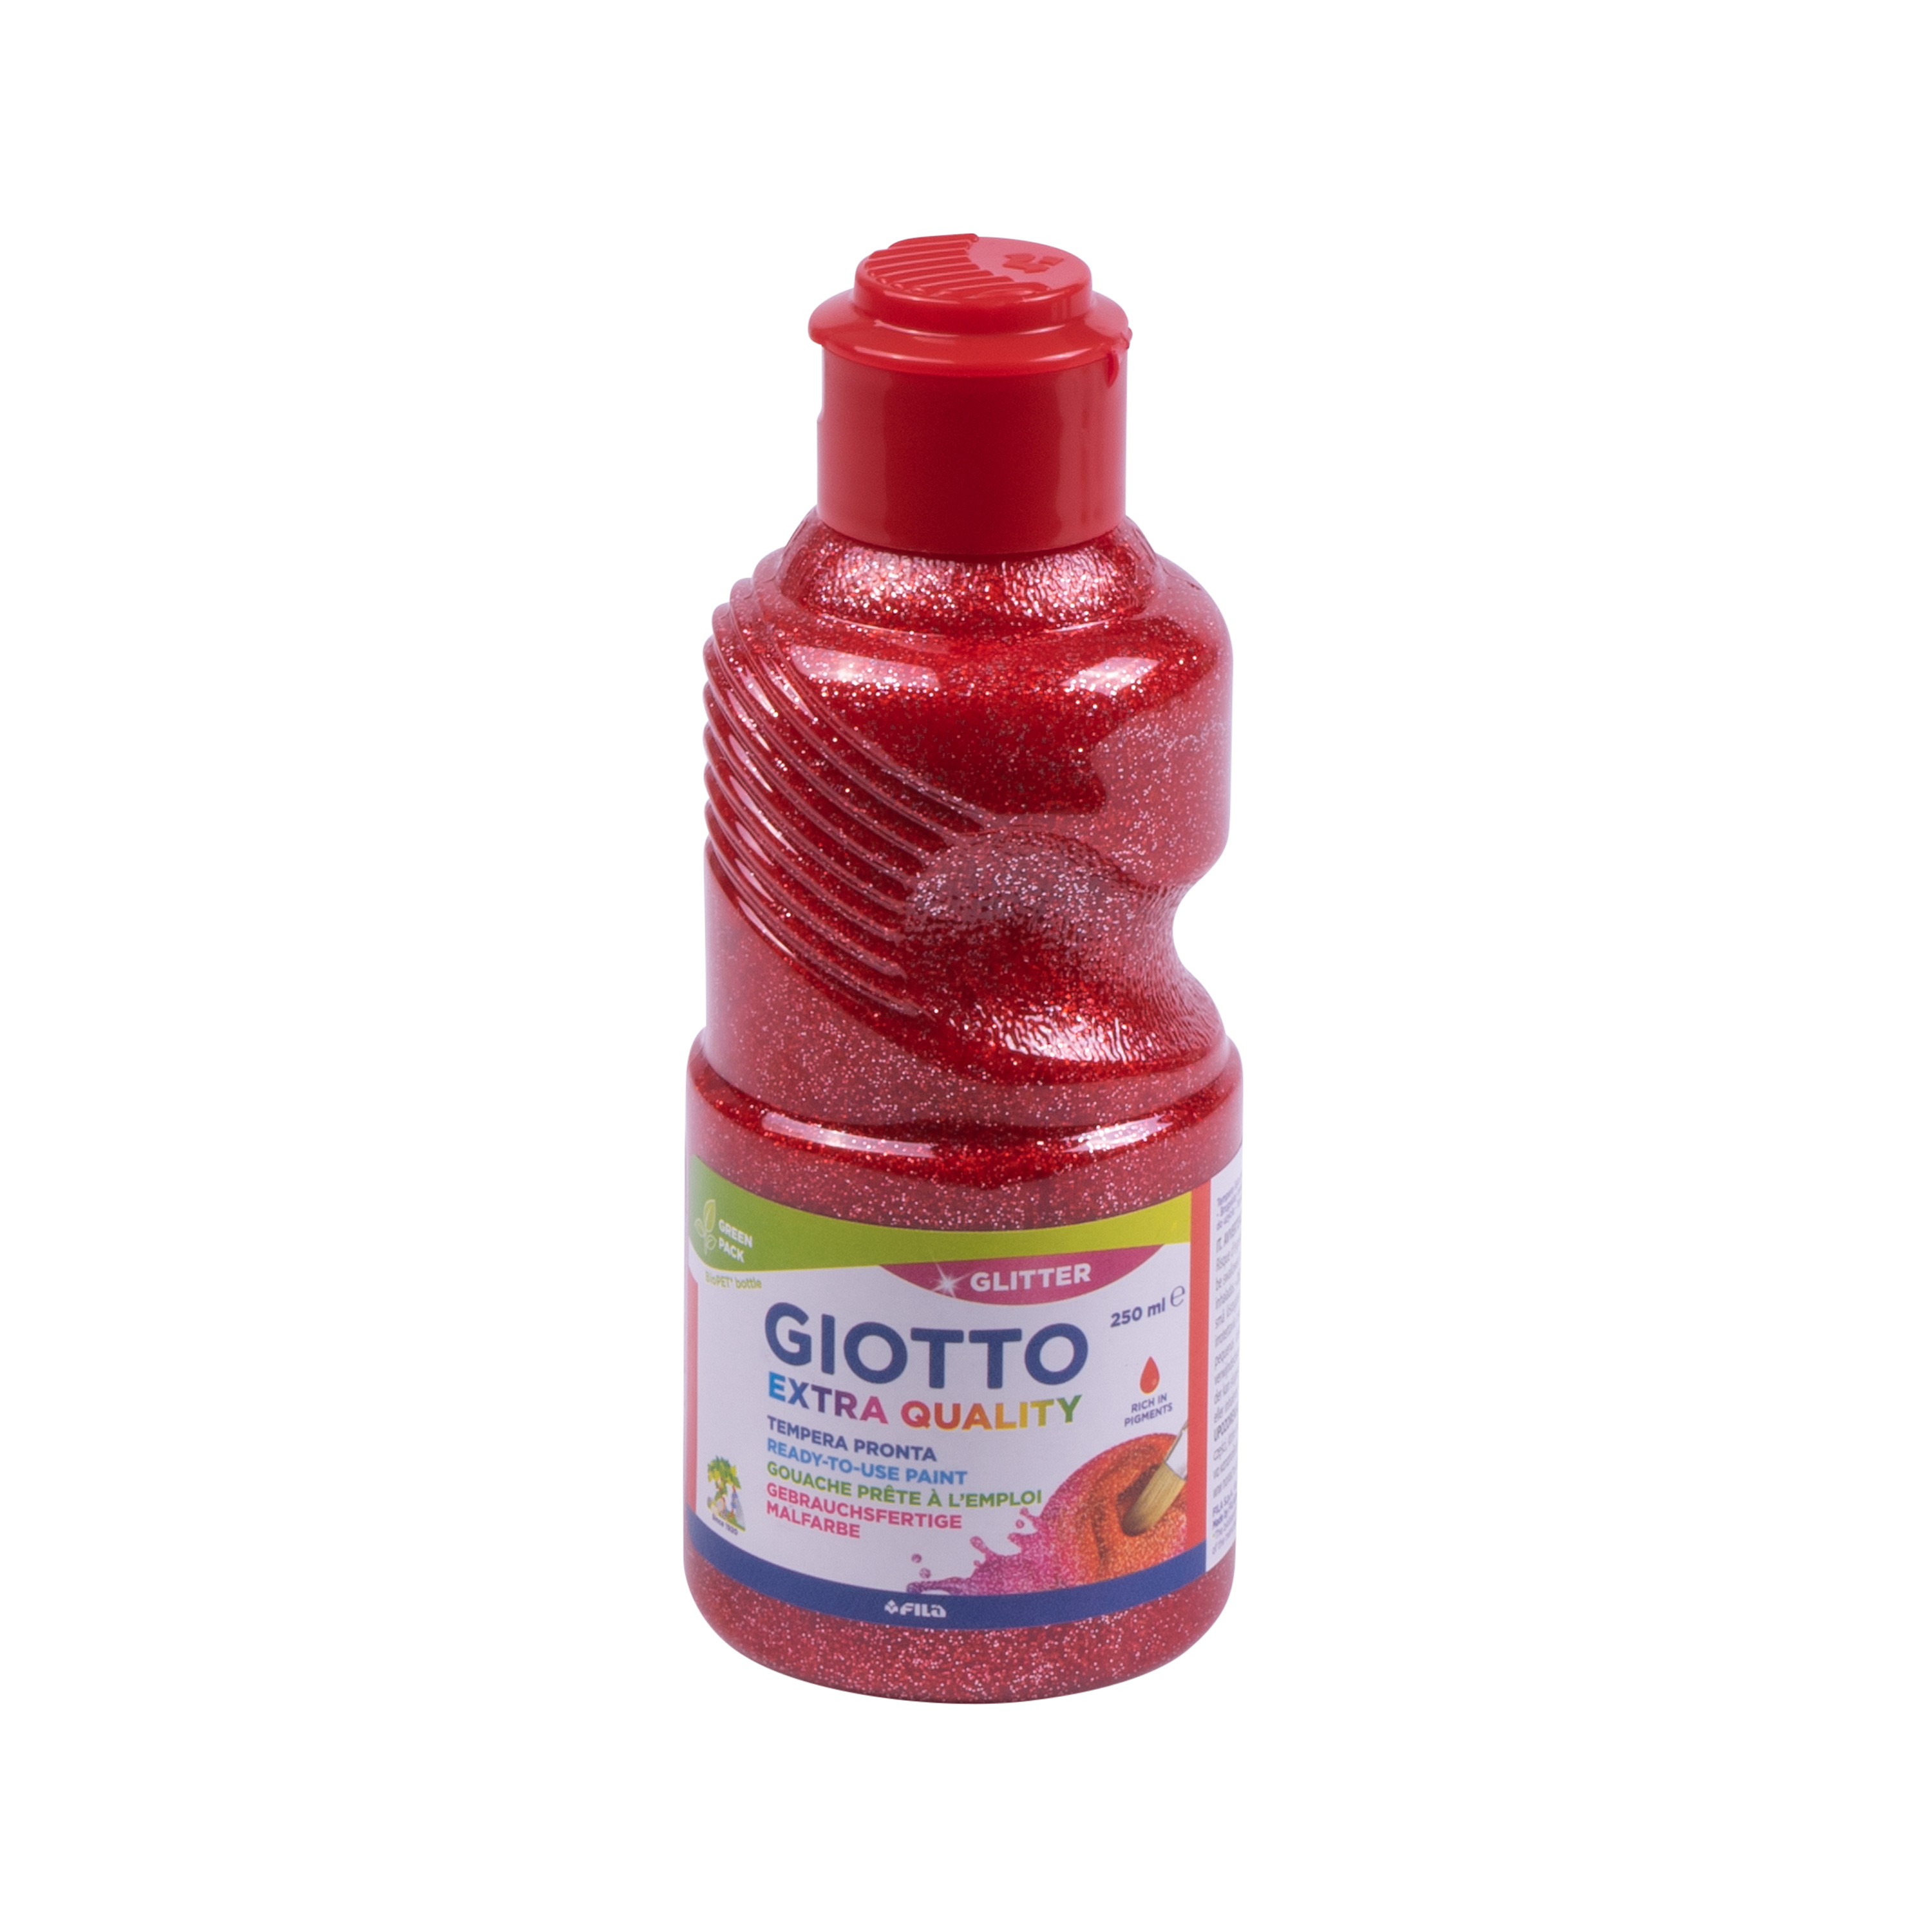 GIOTTO Glitter Paint ,rot', 250 ml je 1 Flasche